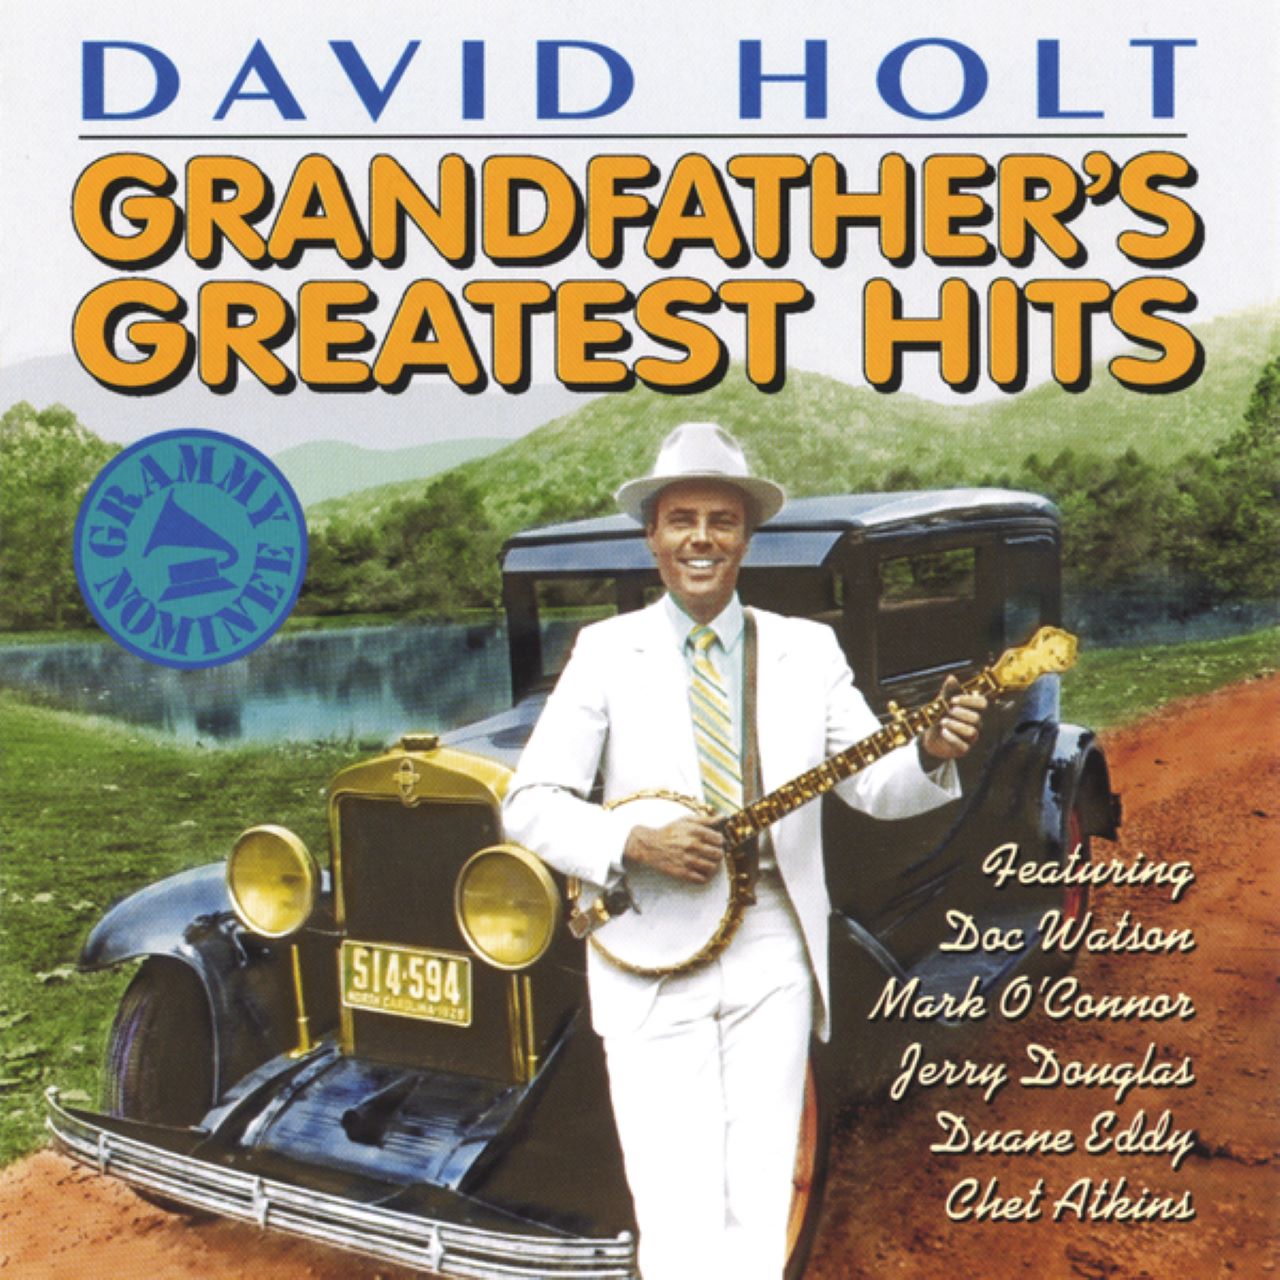 David Holt - Grandfather’s Greatest Hits cover album